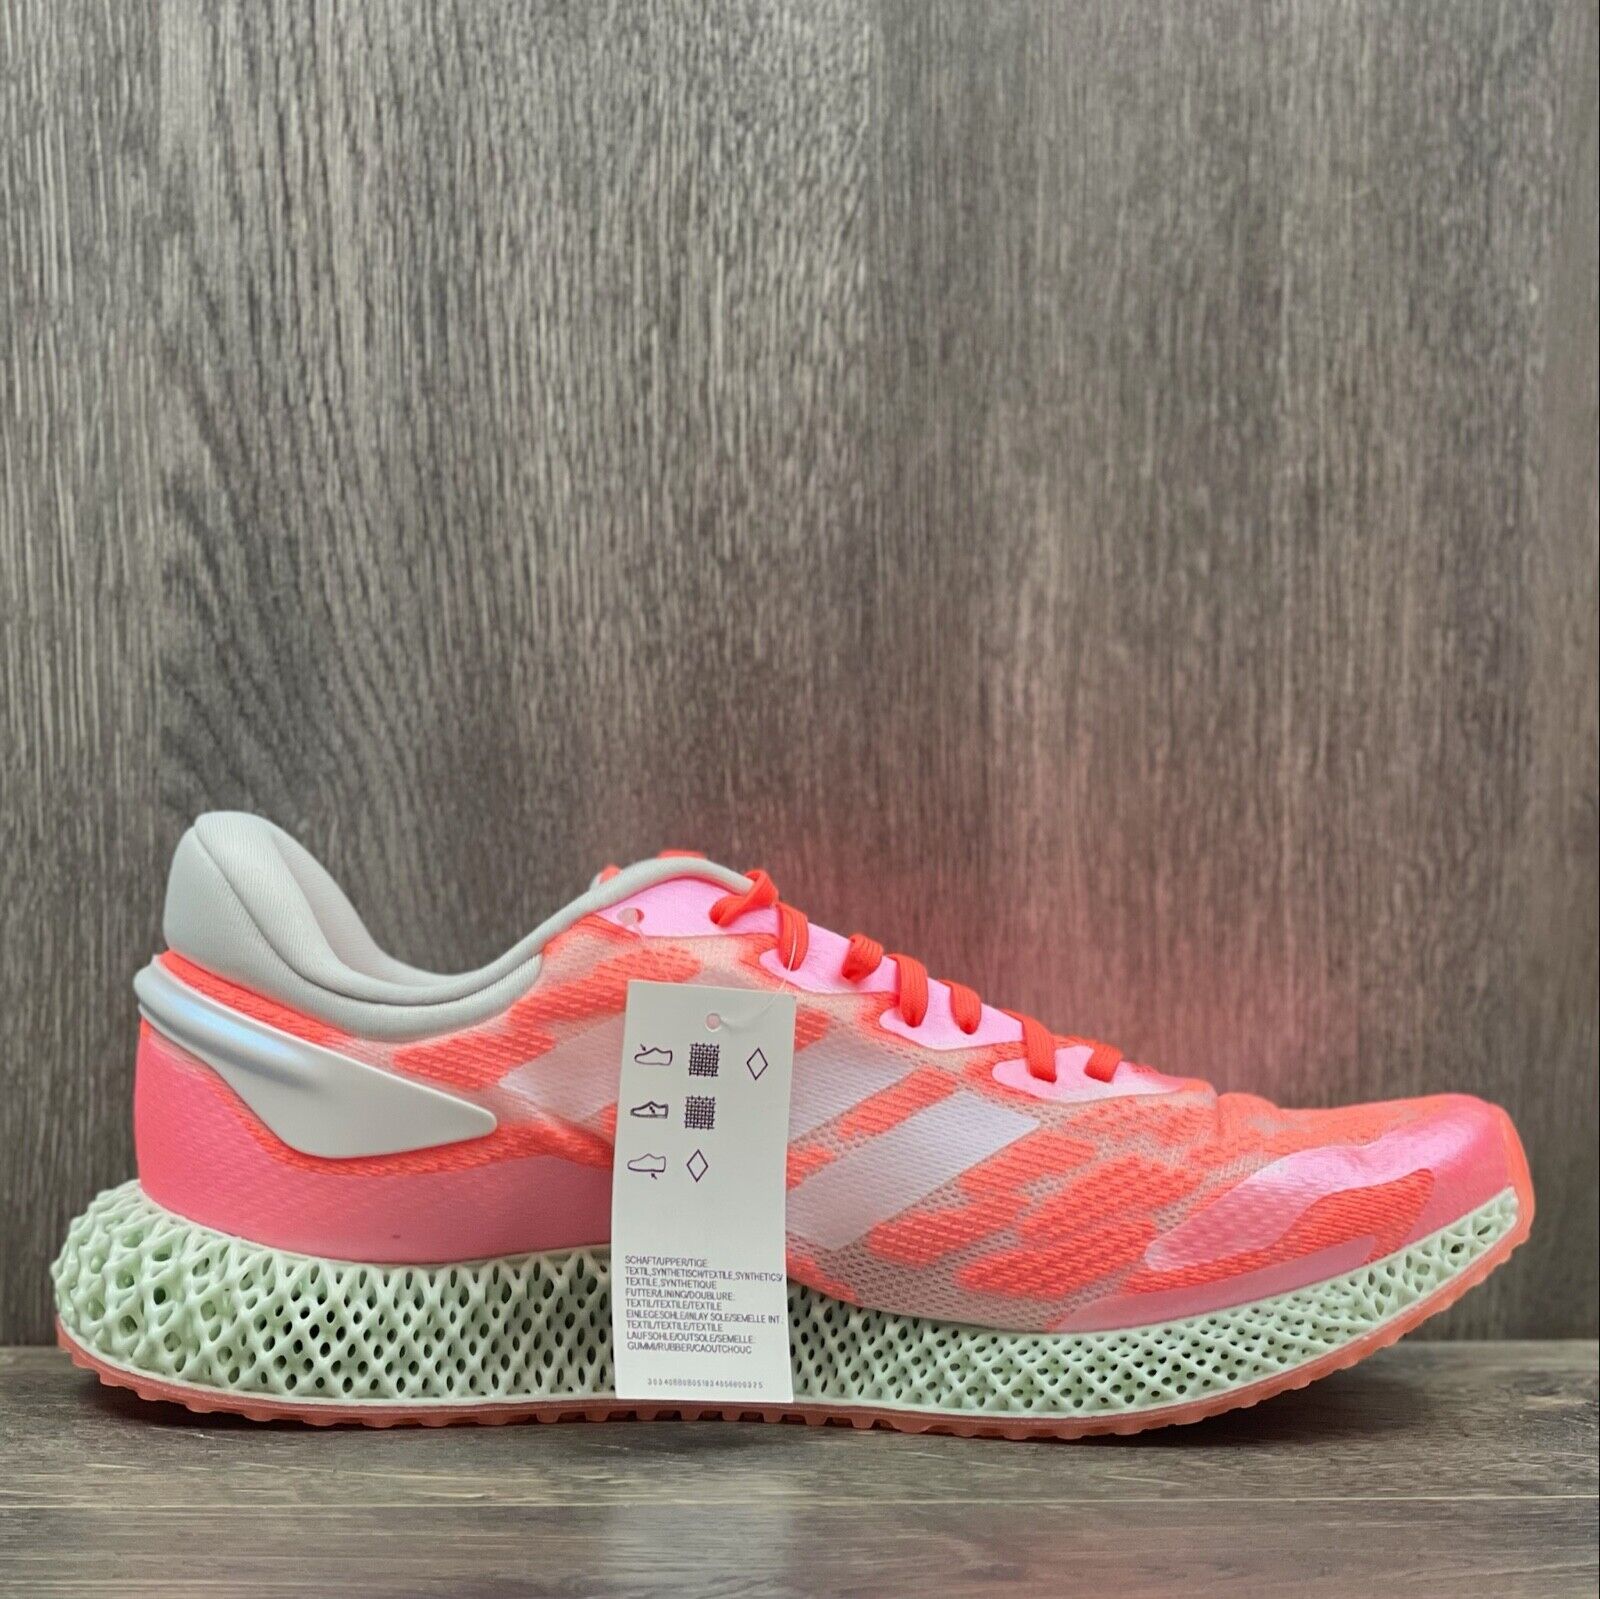 adidas 4D Run 1.0 Running Shoes Sneakers Men’s Sz 10.5 Coral Mint FW6838  Pink